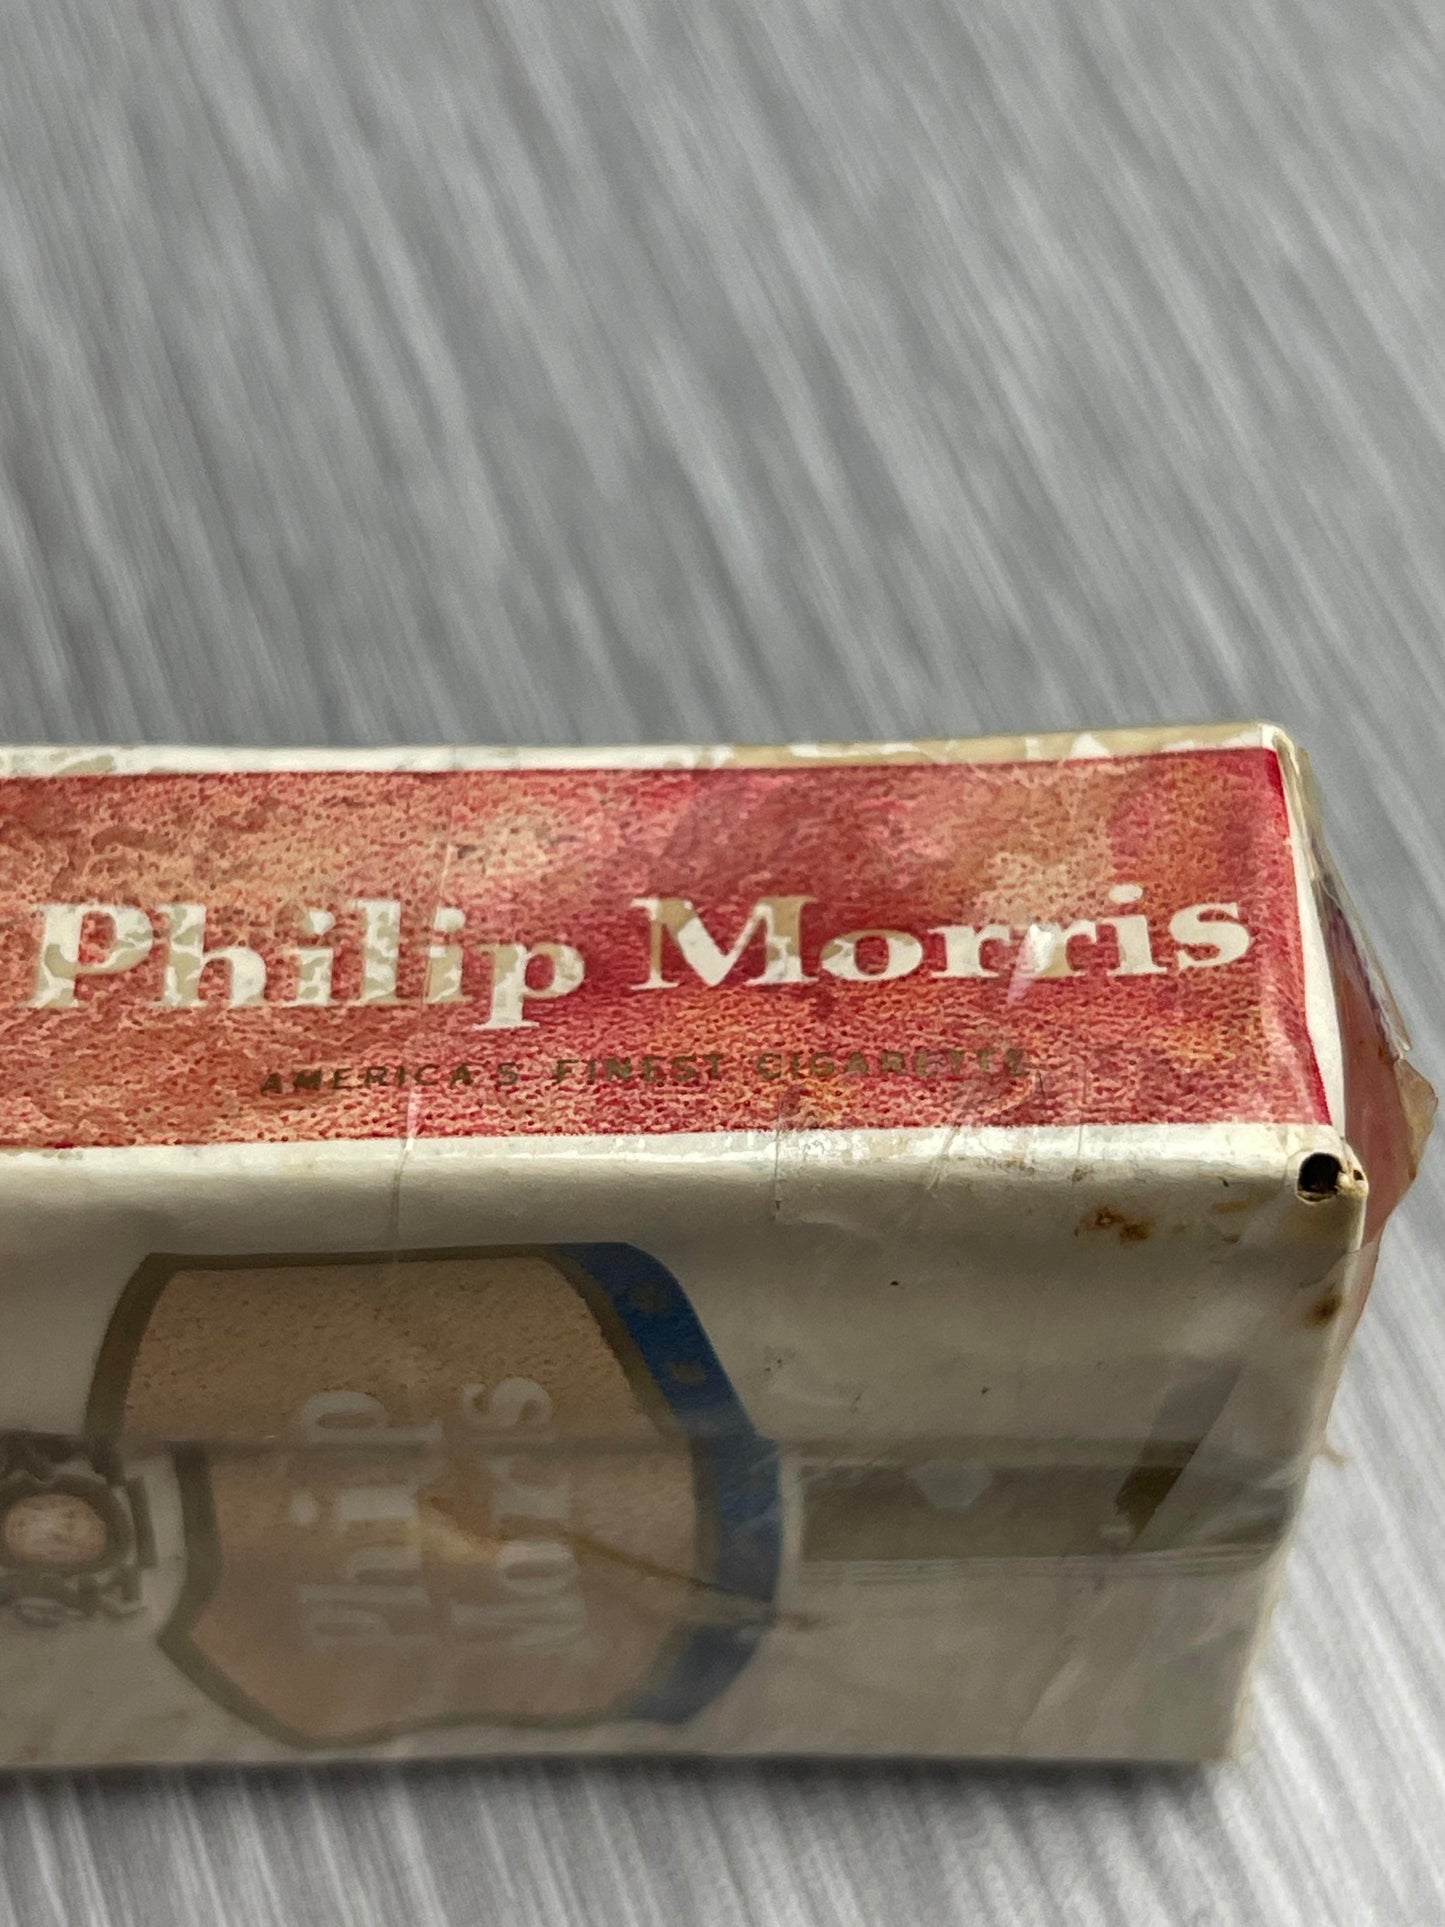 PHILIP MORRIS UNOPENED & SEALED PACK OF 20 "AMERICA'S FINEST CIGARETTES" EARLY/MID CENTURY